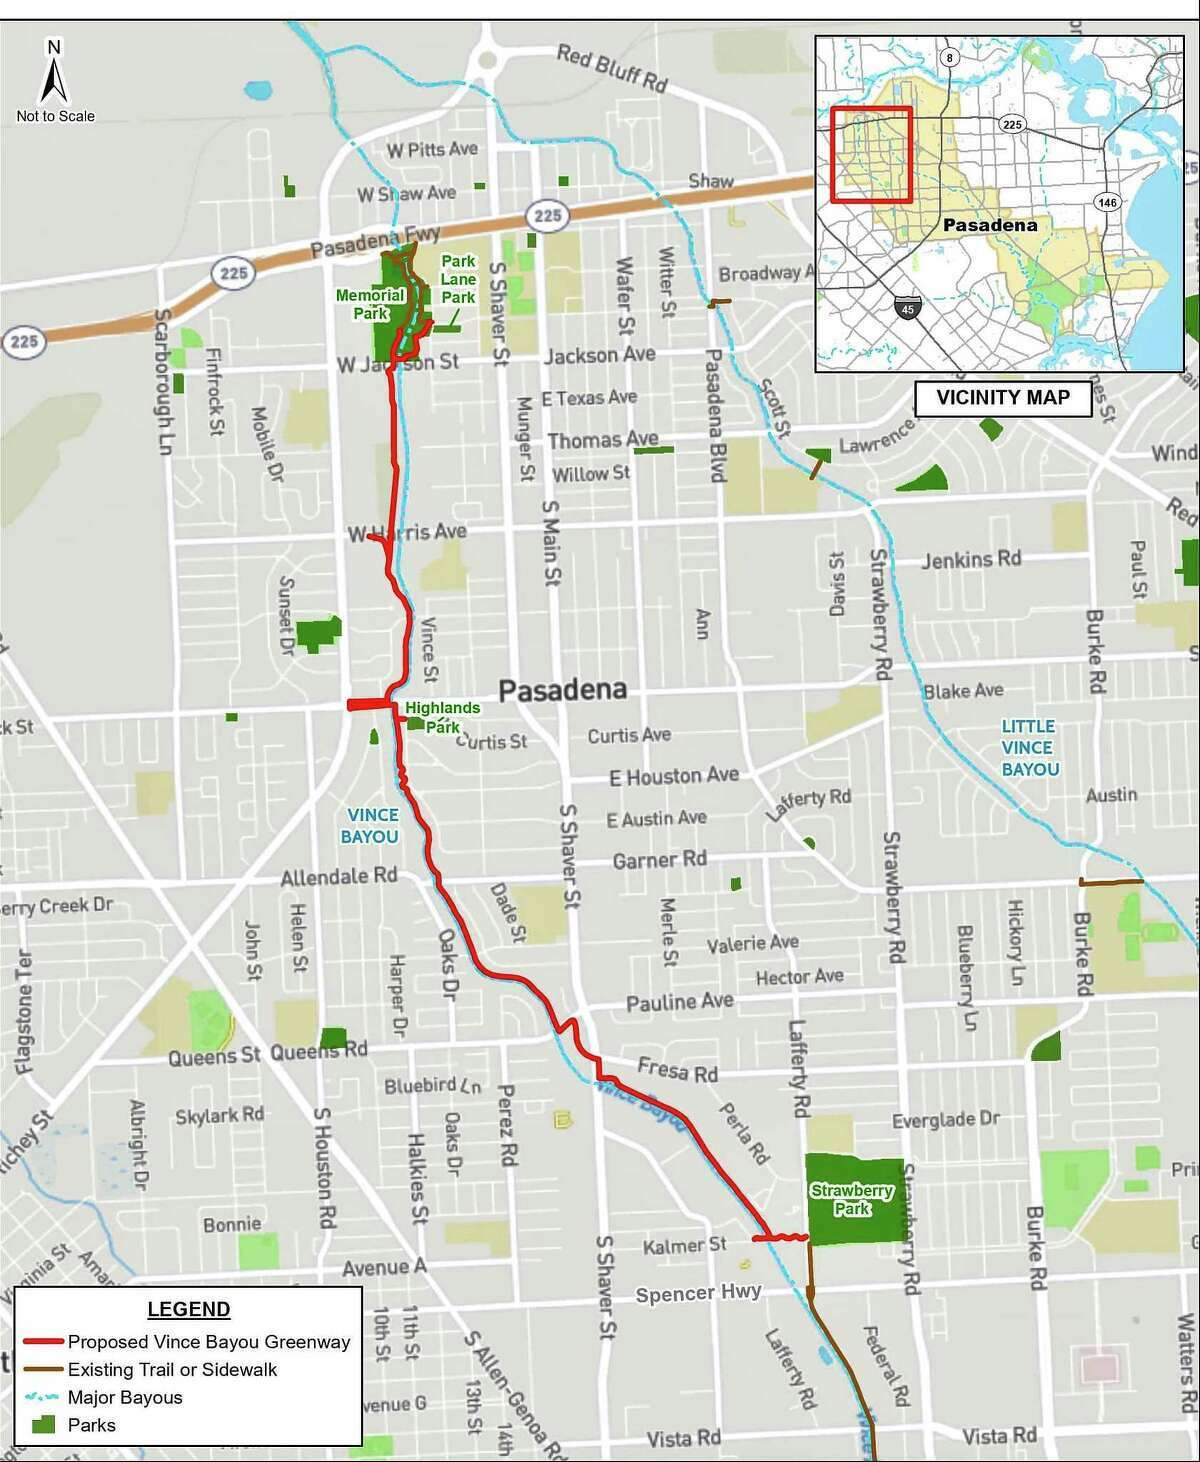 When completed, the entire Vince Bayou Greenway Trail would follow the bayou from Memorial Park south to Strawberry Park, where it would connect with an existing trail that goes to Burke/Crenshaw Park. The first segment would extend from Memorial Park south to the city's community garden on West Harris Avenue.